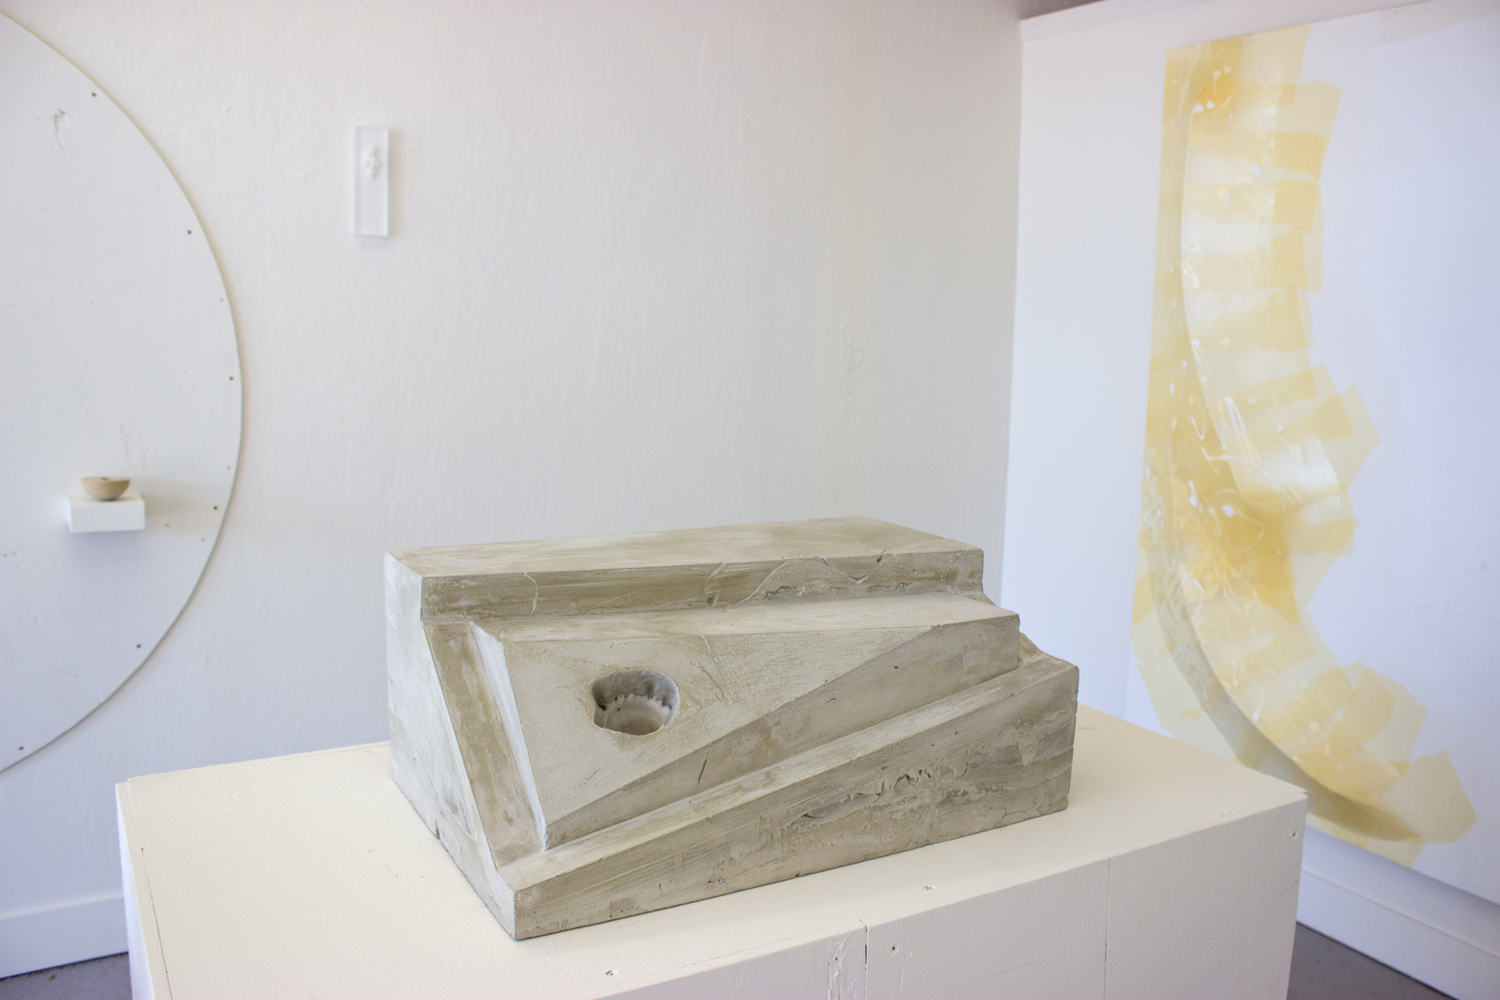  Untitled (concrete shell, rectangle)  2015  Cast concrete altered rectangle, embedded decorative shell&nbsp;  10 x 16 x 24 inches 